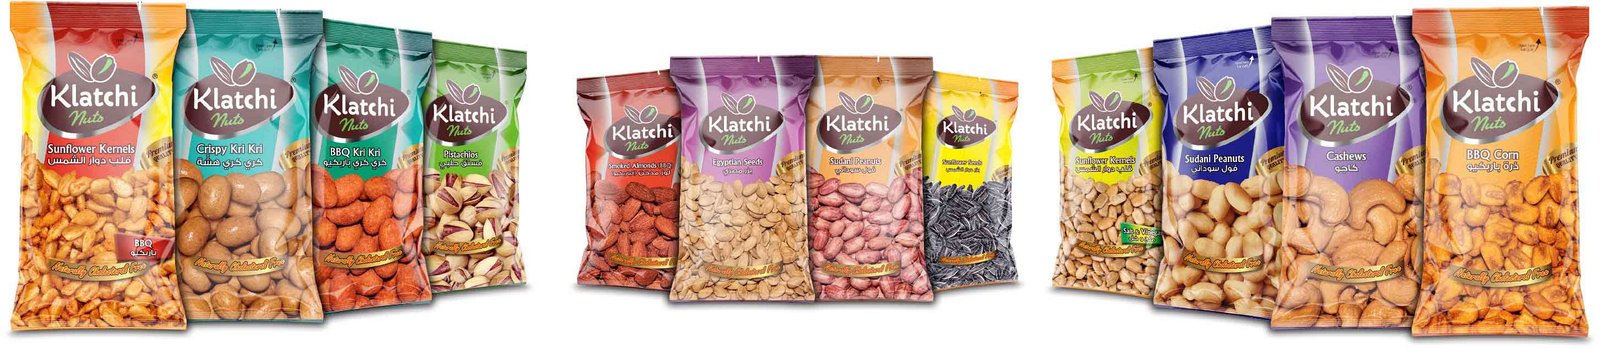 Different types of small bags filled with klatchi nuts 